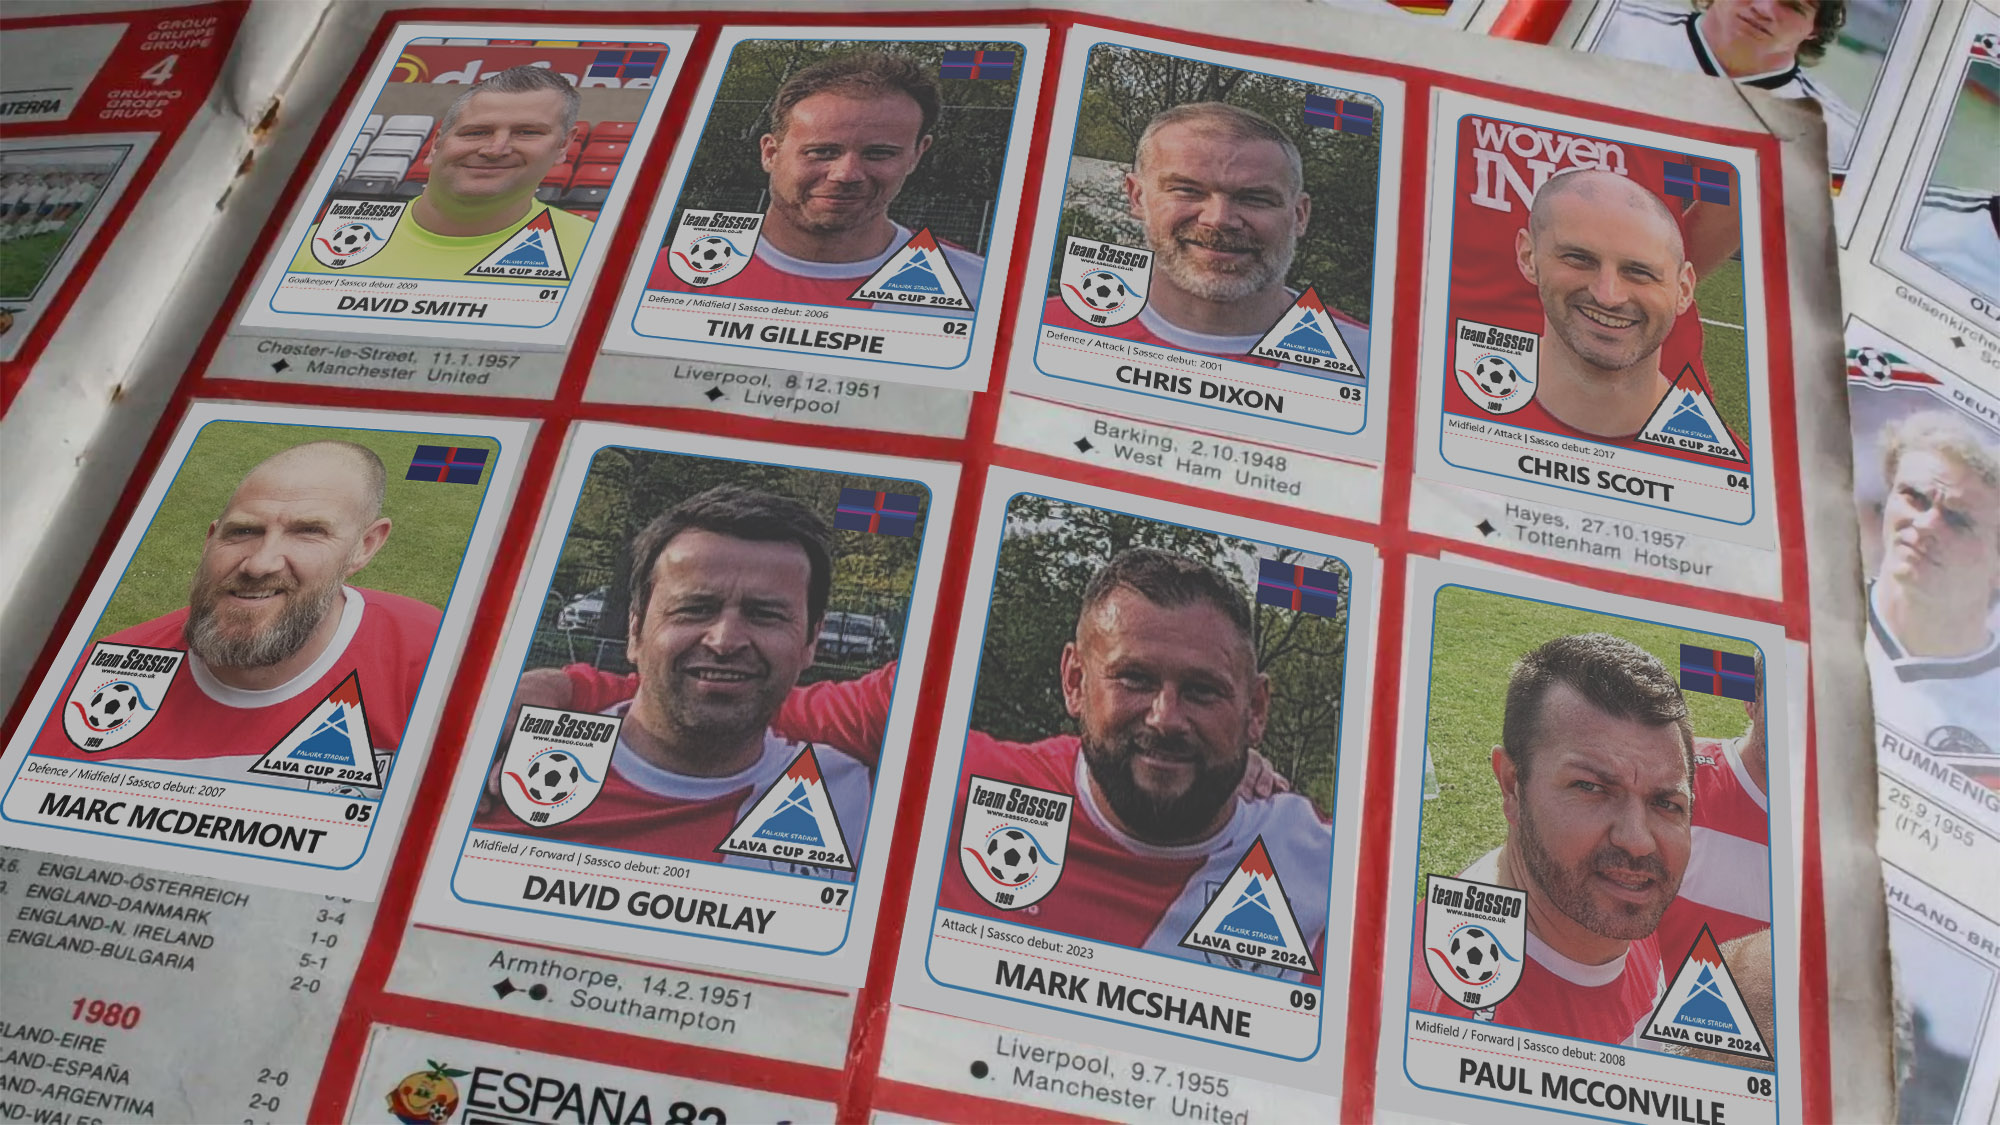 Panini stickers for the Lava Cup.